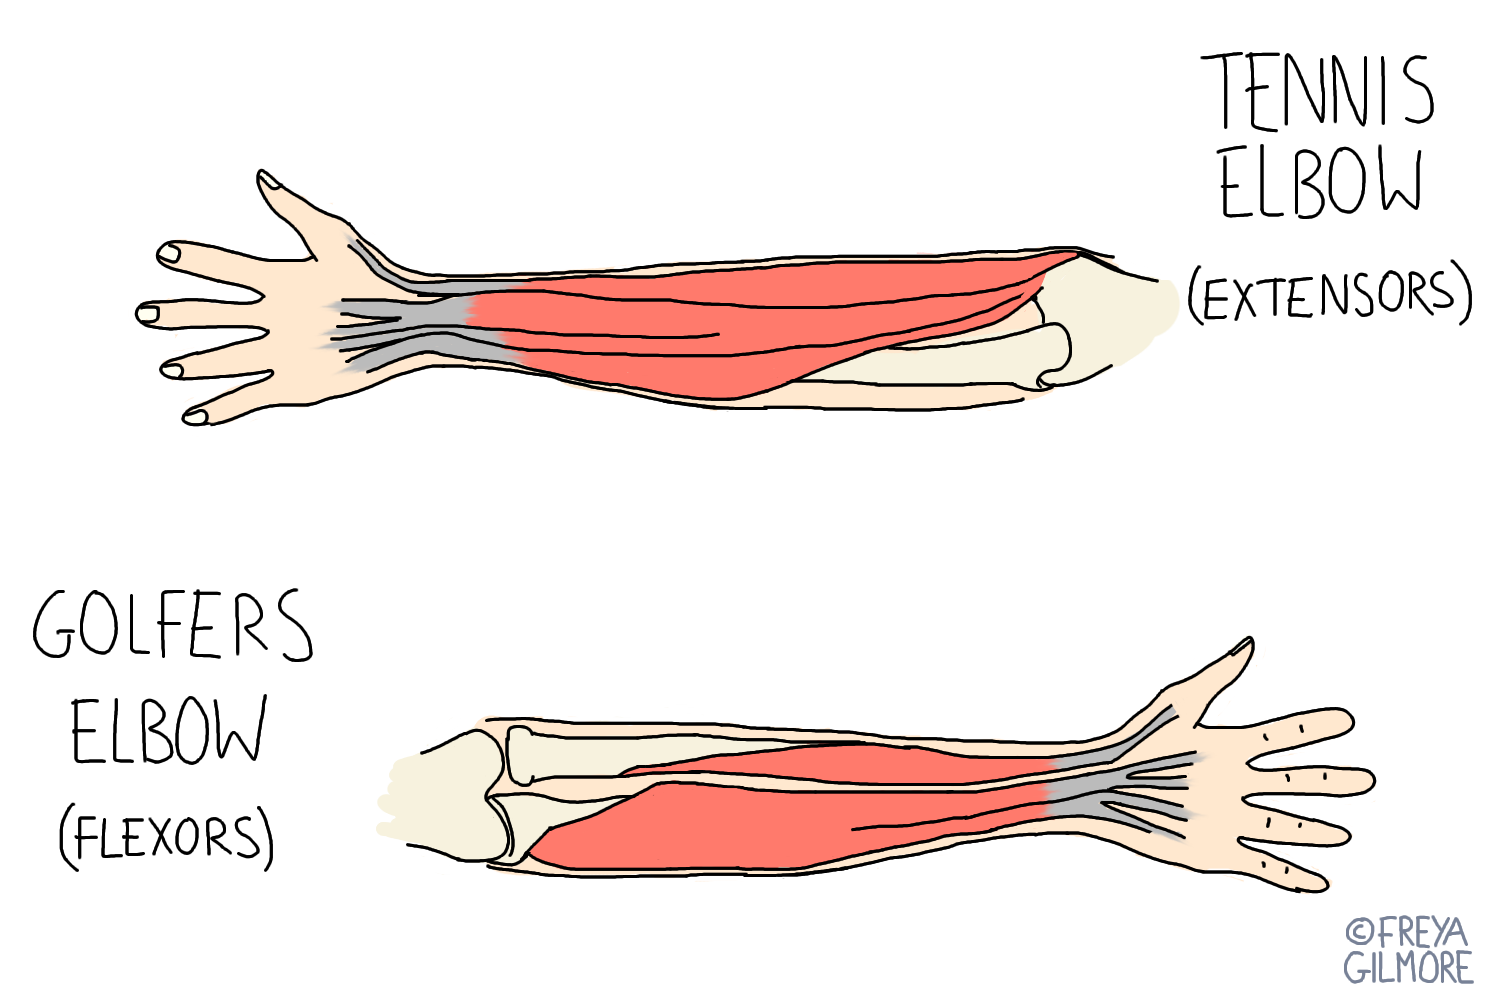 Anatomy affected in Tennis Elbow and Golfers Elbow